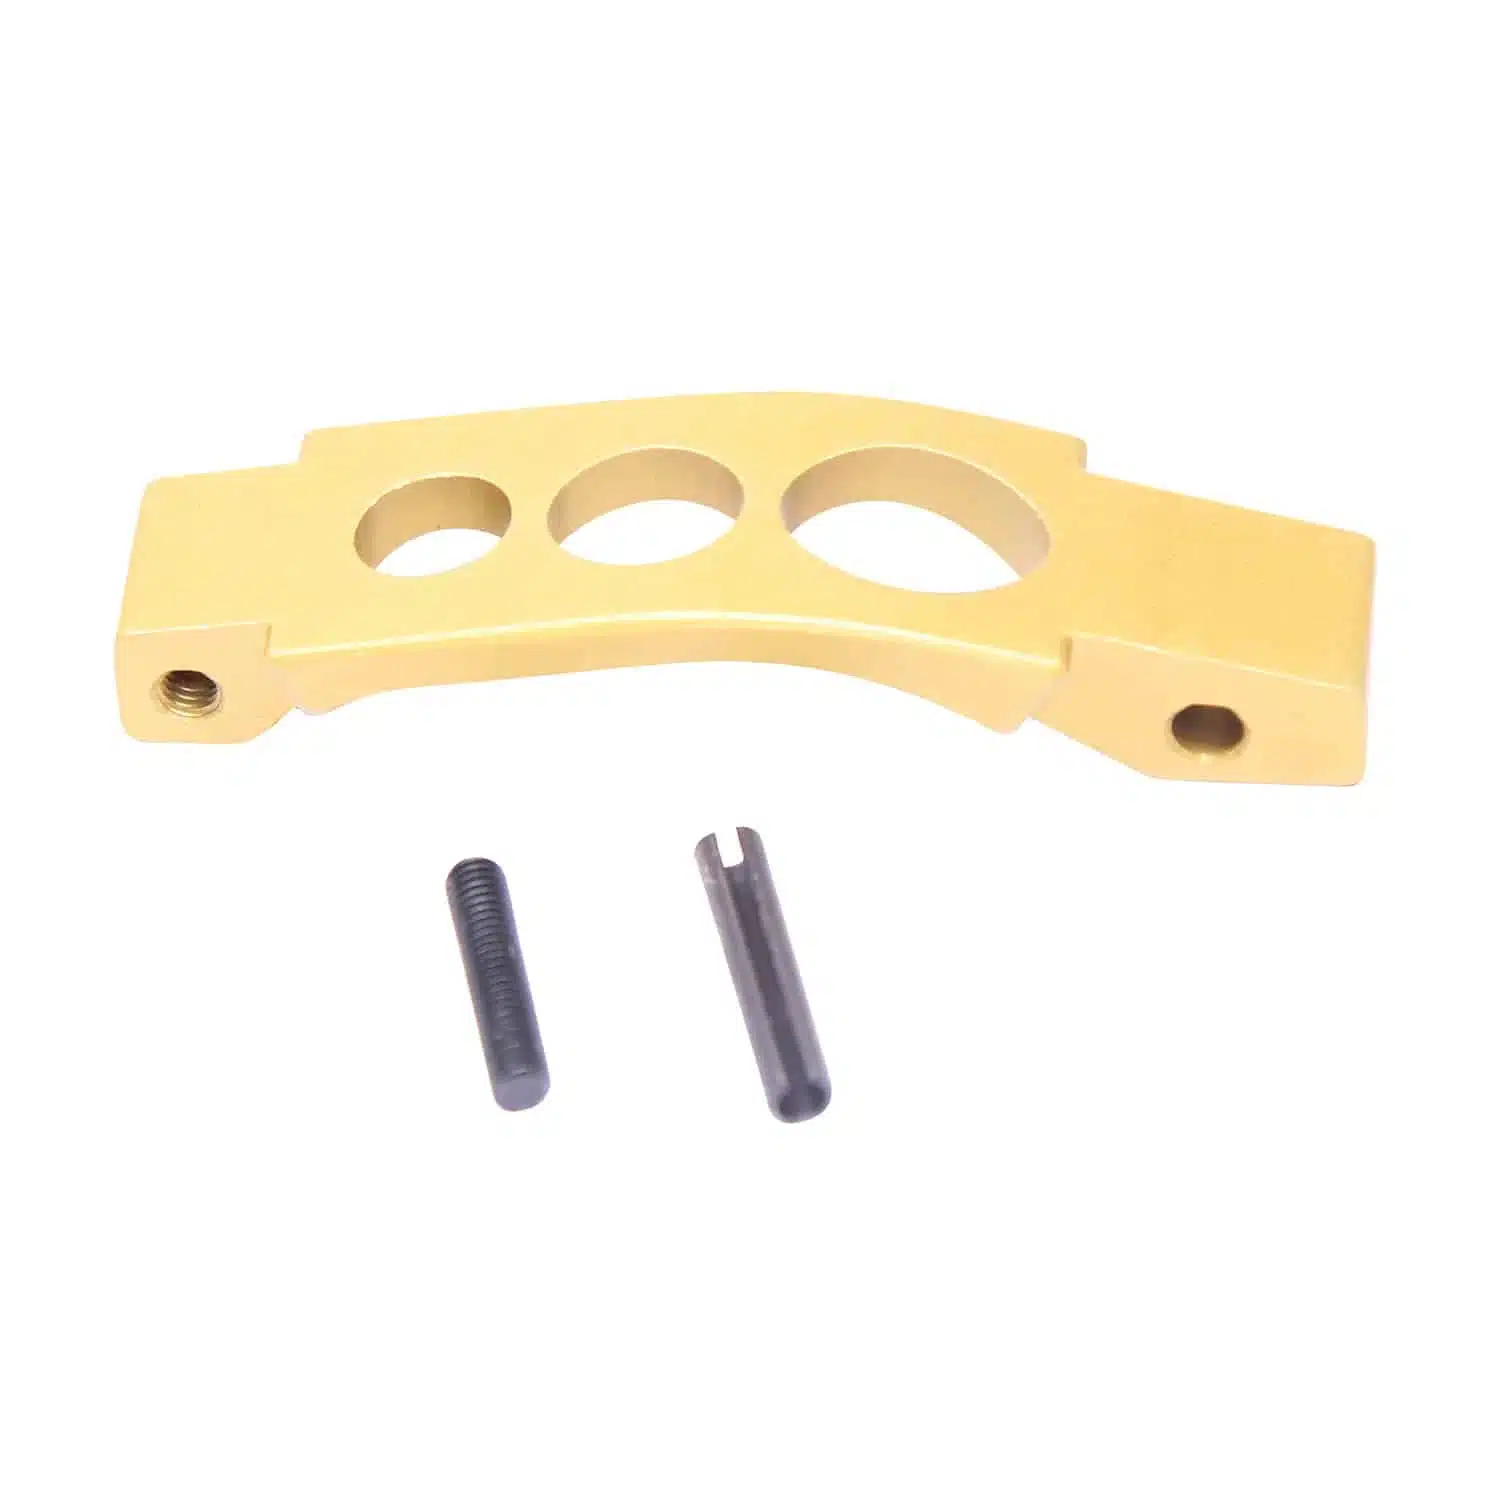 AR-15 Extended Trigger Guard in Anodize Gold